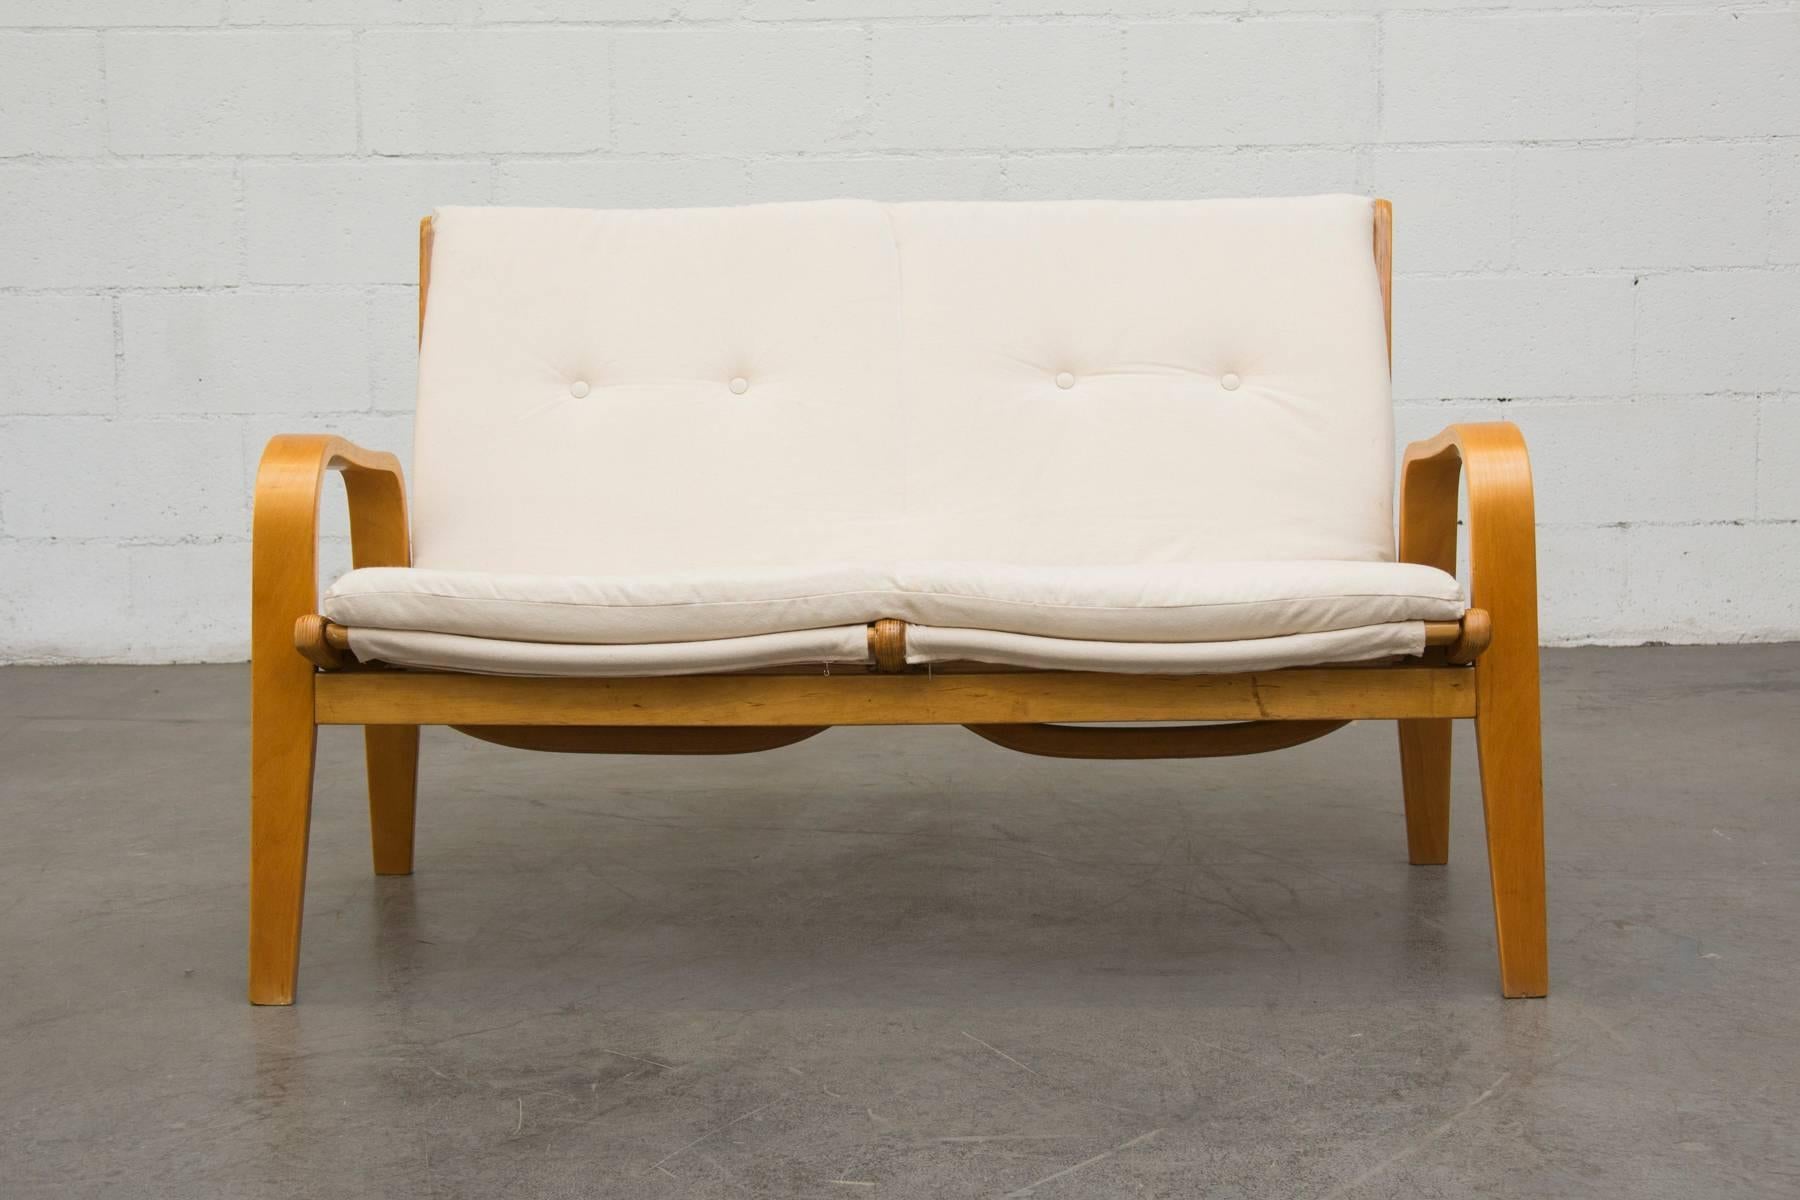 Alvar Aalto style bent birch framed loveseat with original strapping and new natural canvas cushion. Pastoe easy chair (model FB06) designed by Cees Braakman for UMS Pastoe in the 1950s. Loveseat may vary slightly from the one photographed as there